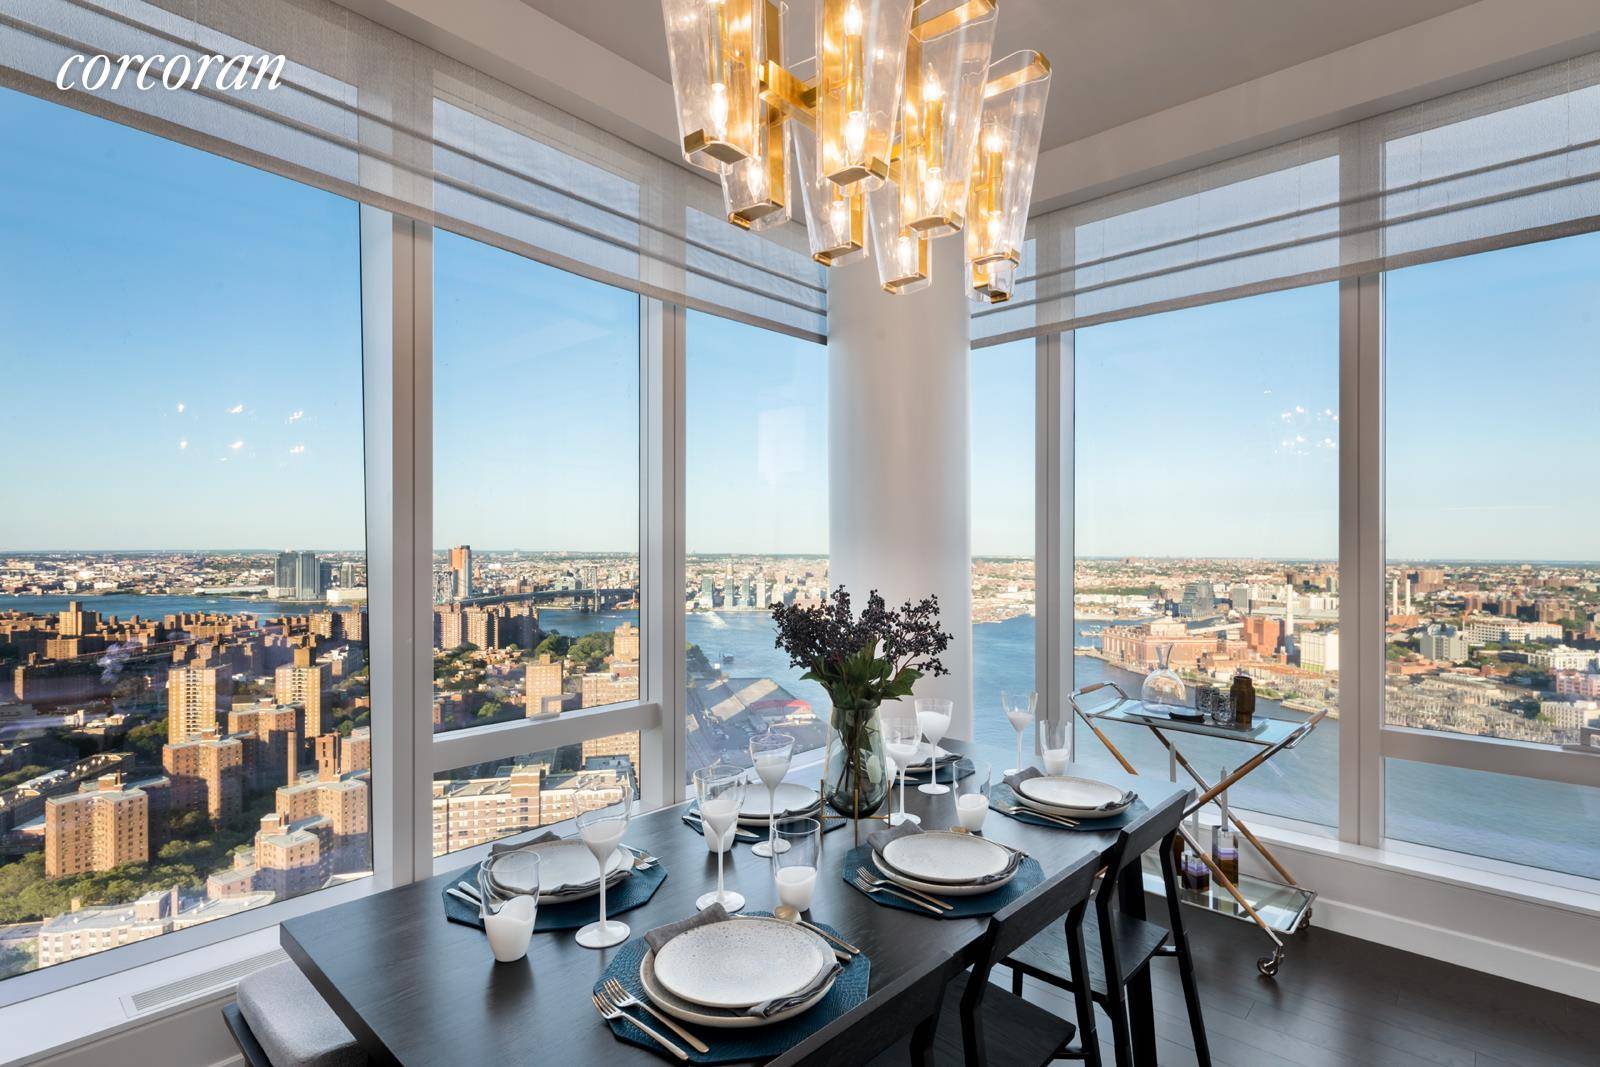 Virtual Tours of One Manhattan Square residences are available as well as limited in person showings, strictly by appointment only.